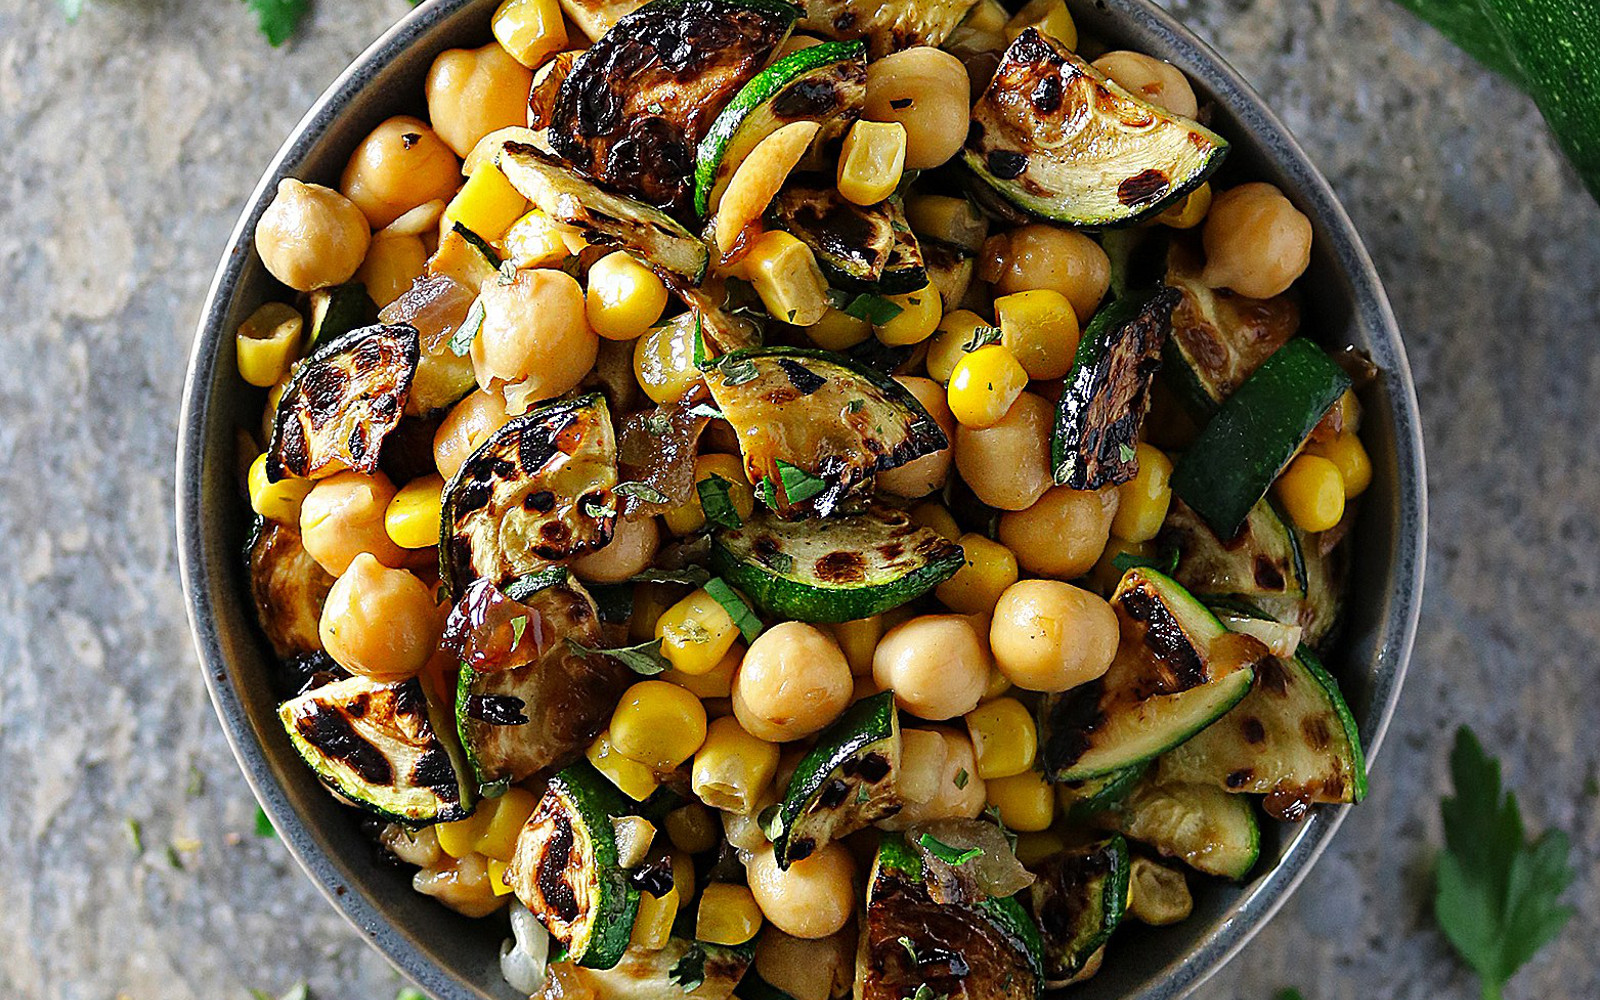 Vegan Whole Food Plant Based Gluten-Free 5-Ingredient Charred Zucchini Salad with caramelized onions, chickpeas, and corn